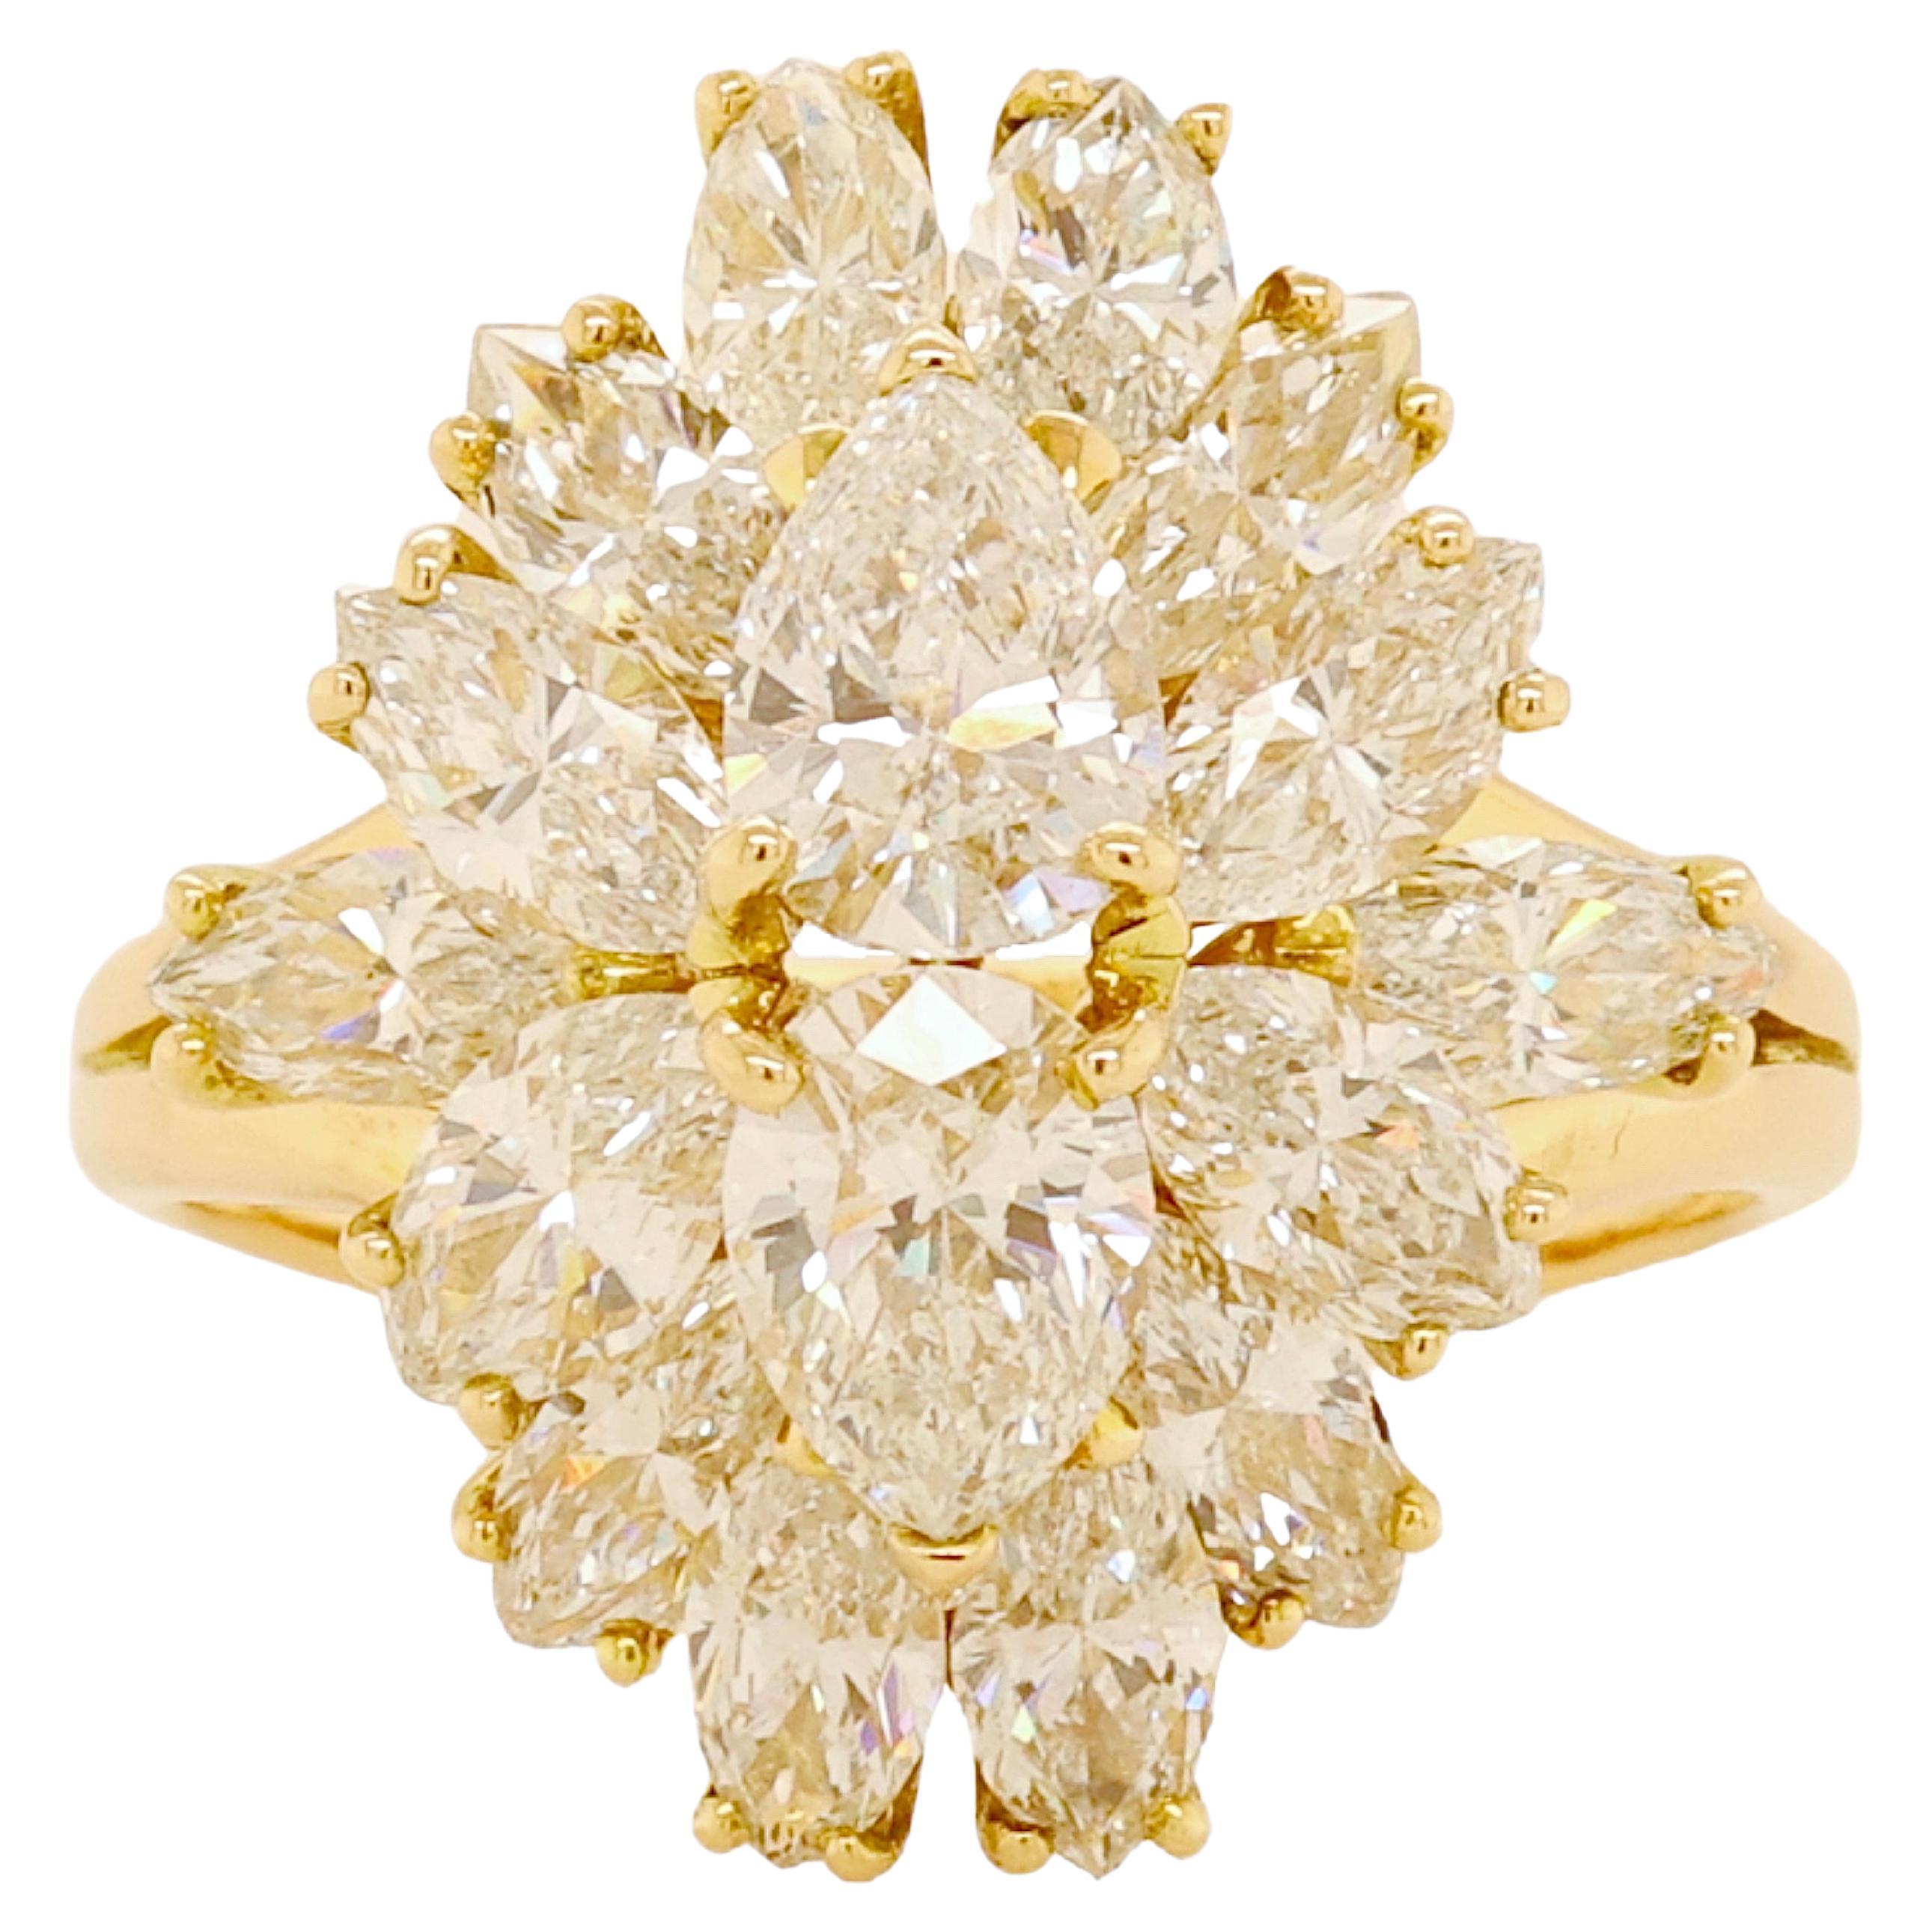 Asprey London 18kt. Yellow Gold Ring With 3.23 ct. Pear & Marquise Cut Diamonds In Excellent Condition For Sale In Antwerp, BE